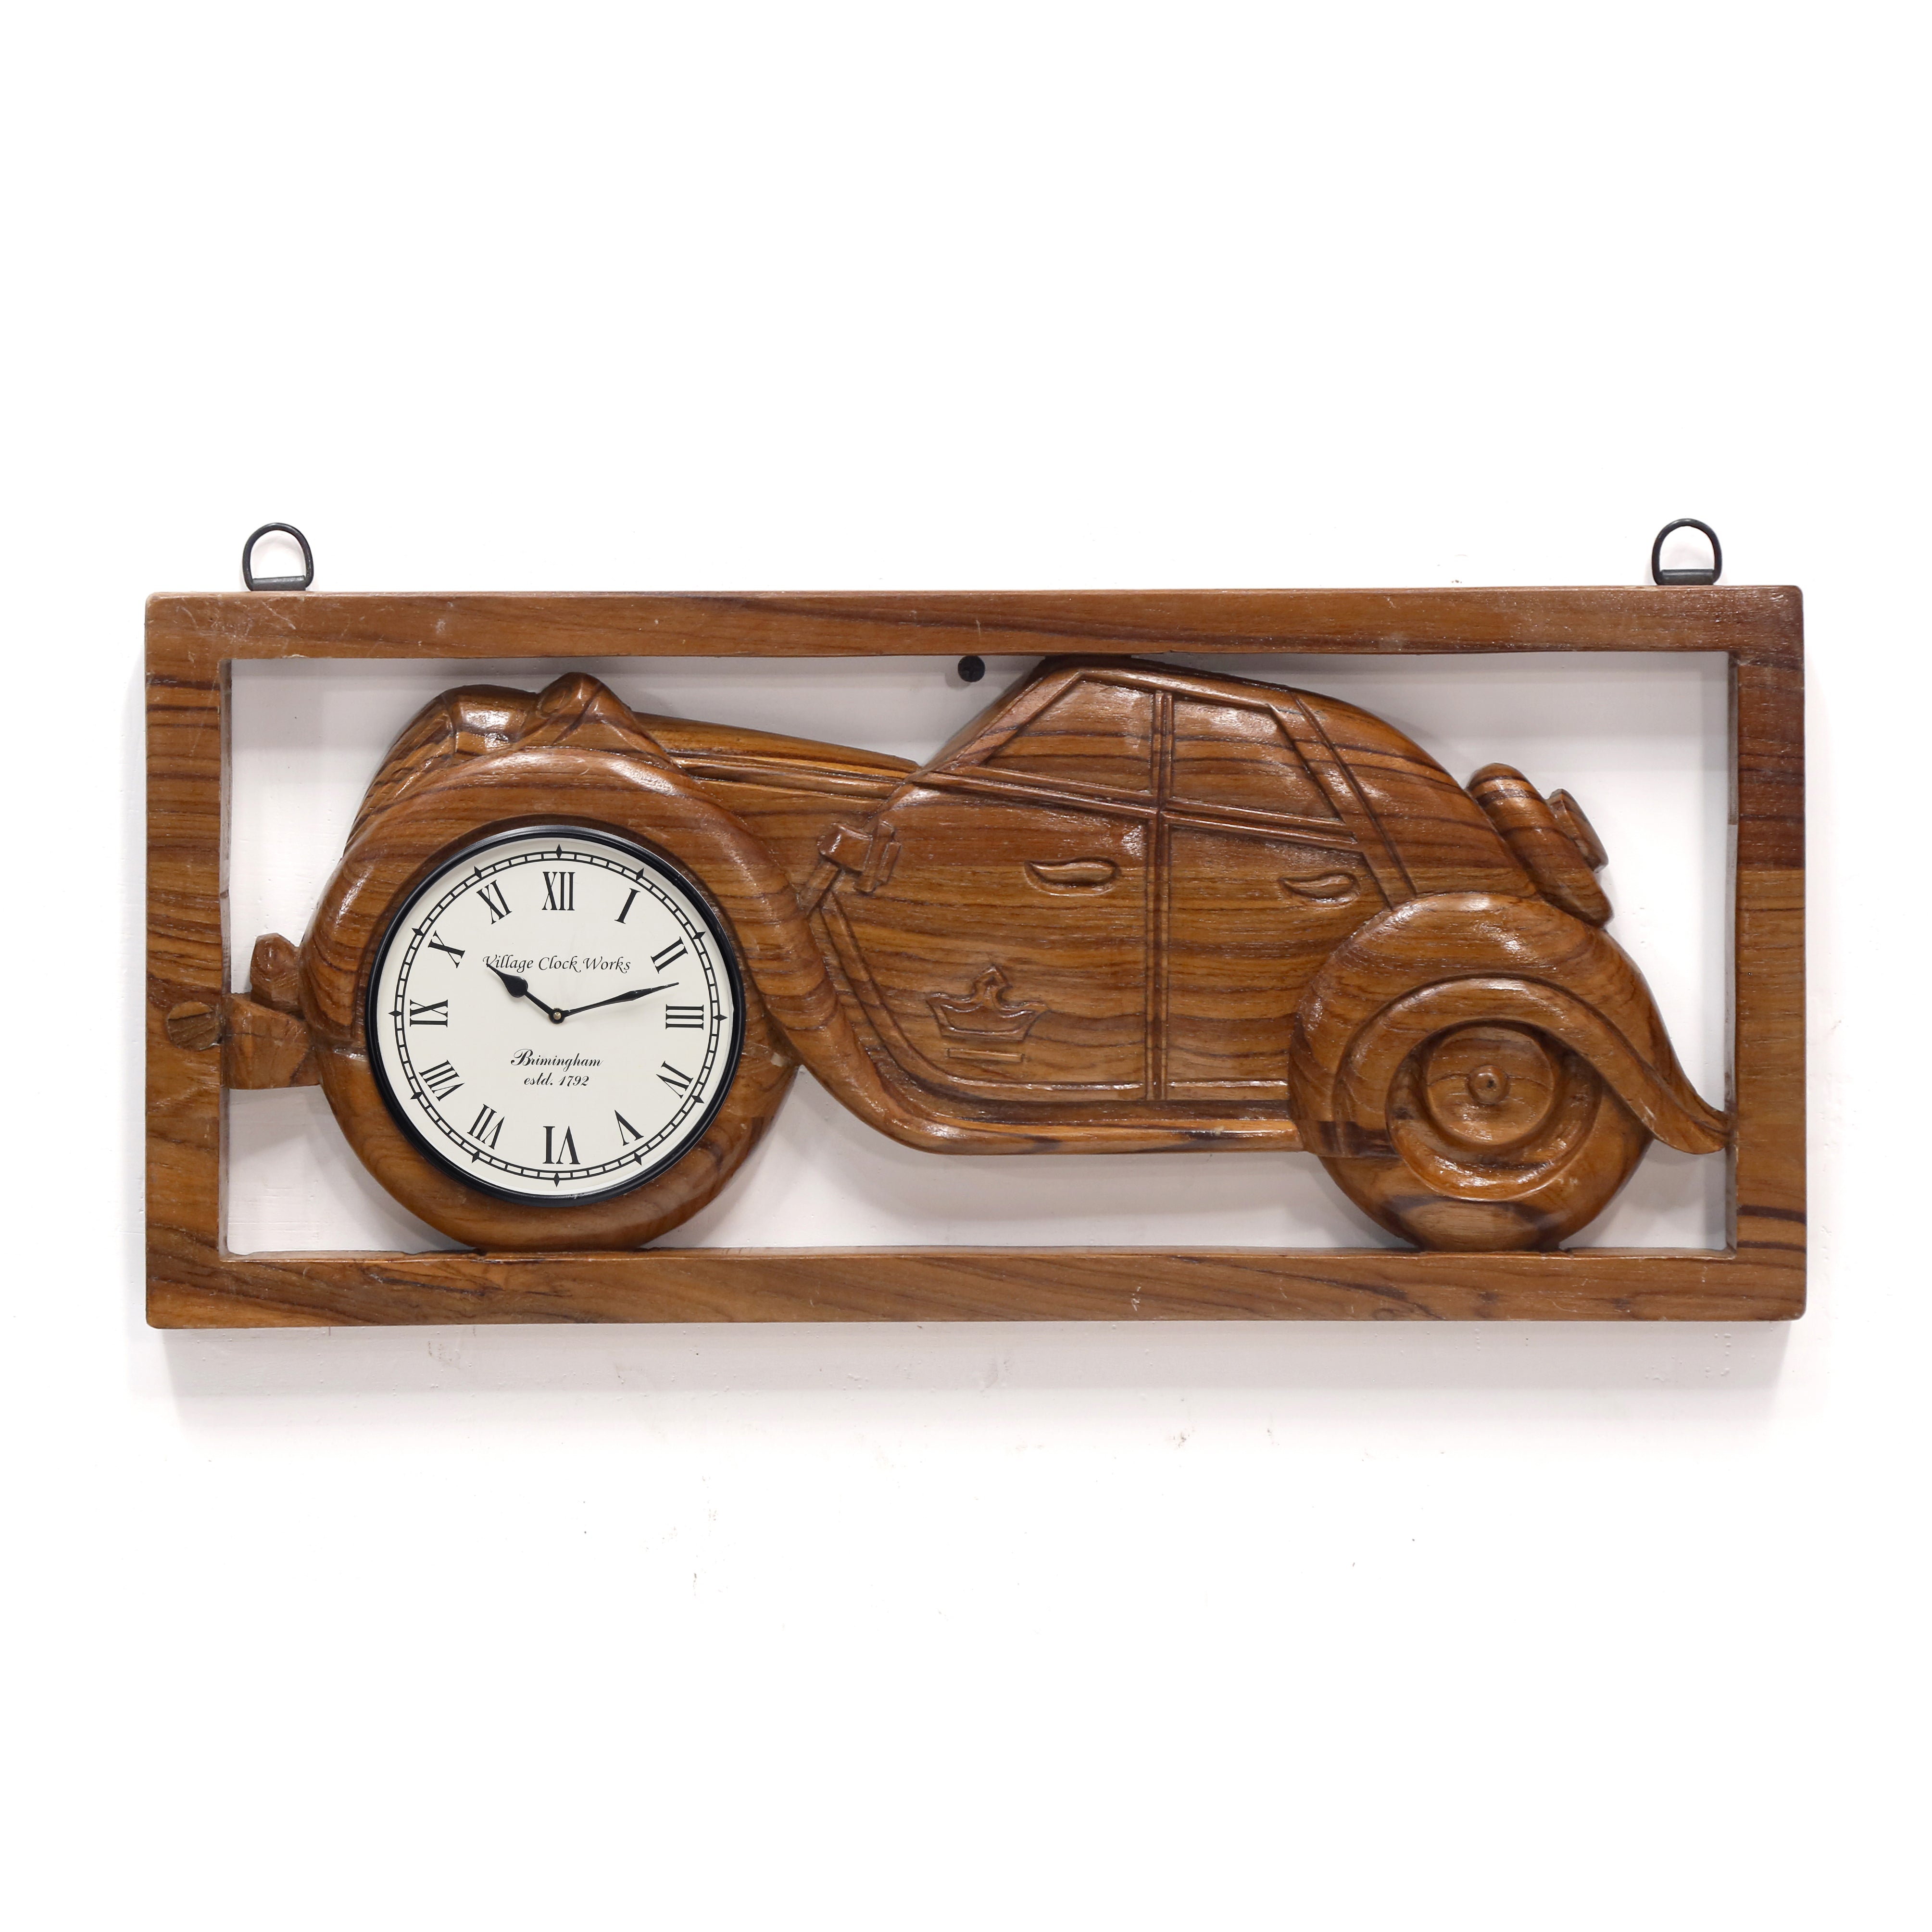 8 Day Ship Clock mounted on wooden base for hanging - l'art et l'automobile